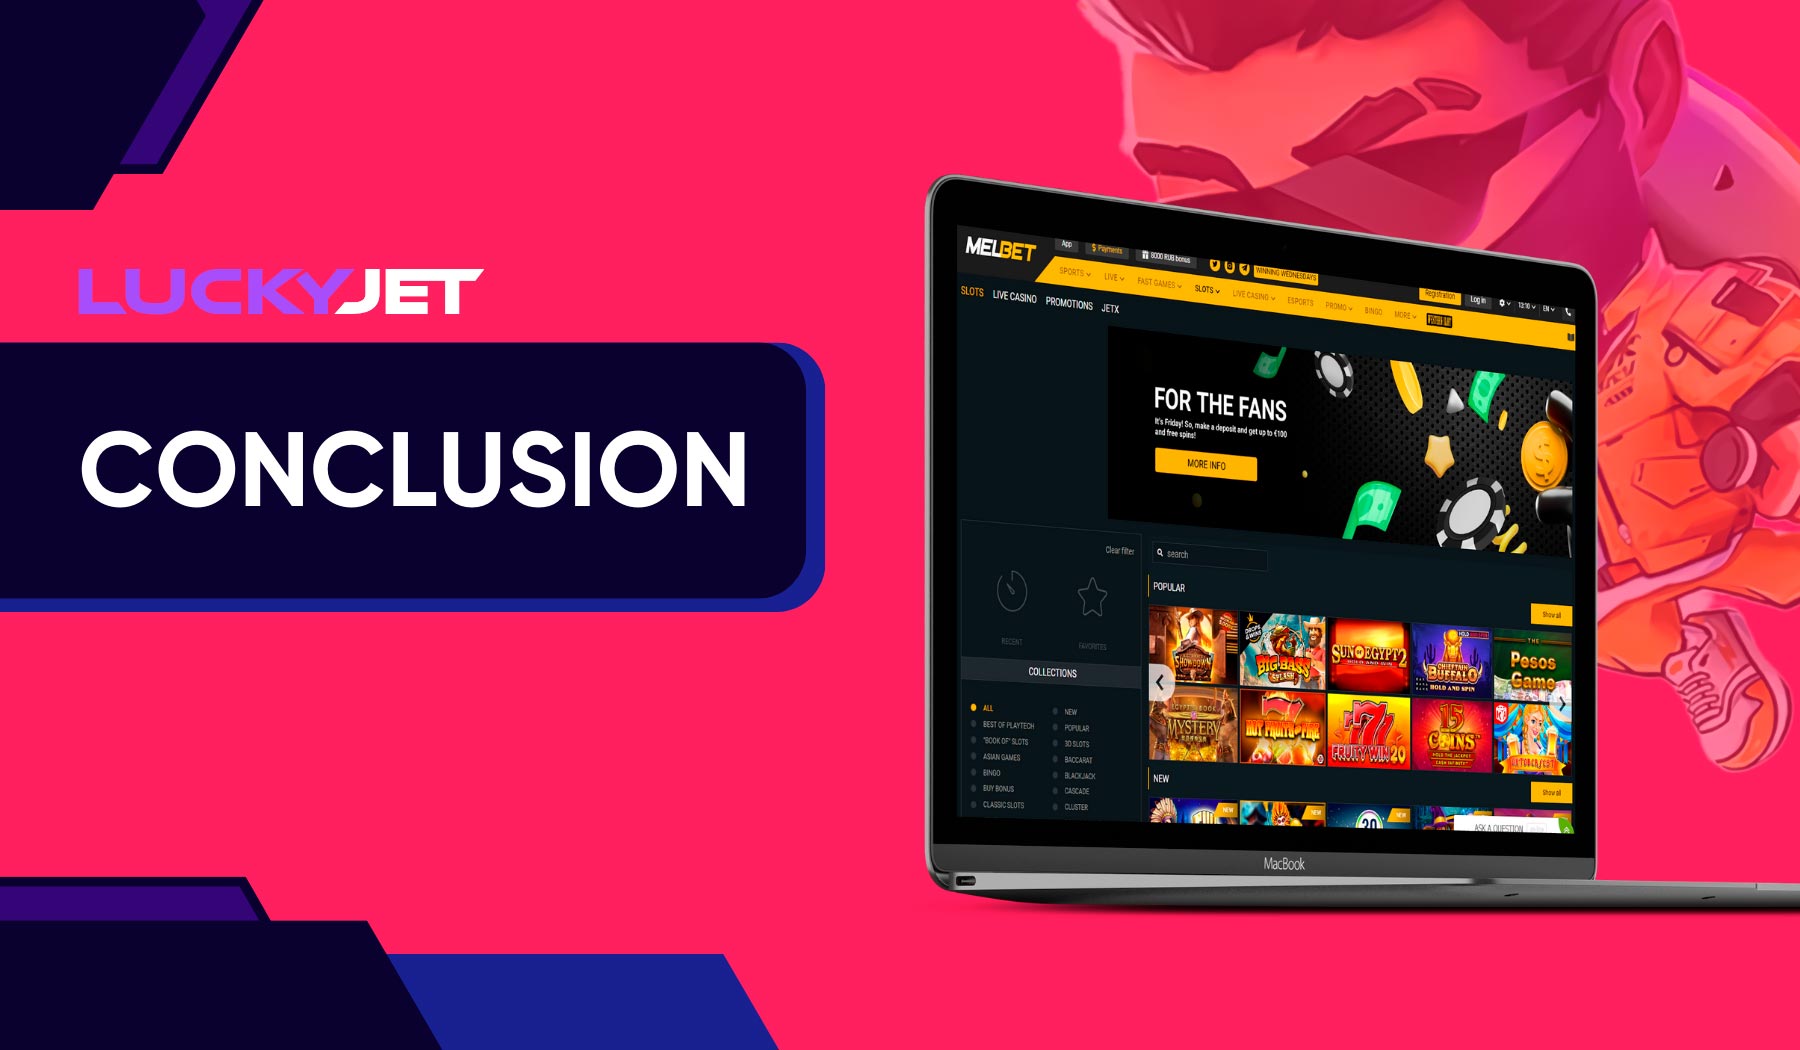 Lucky Jet Melbet slot presented by Melbet